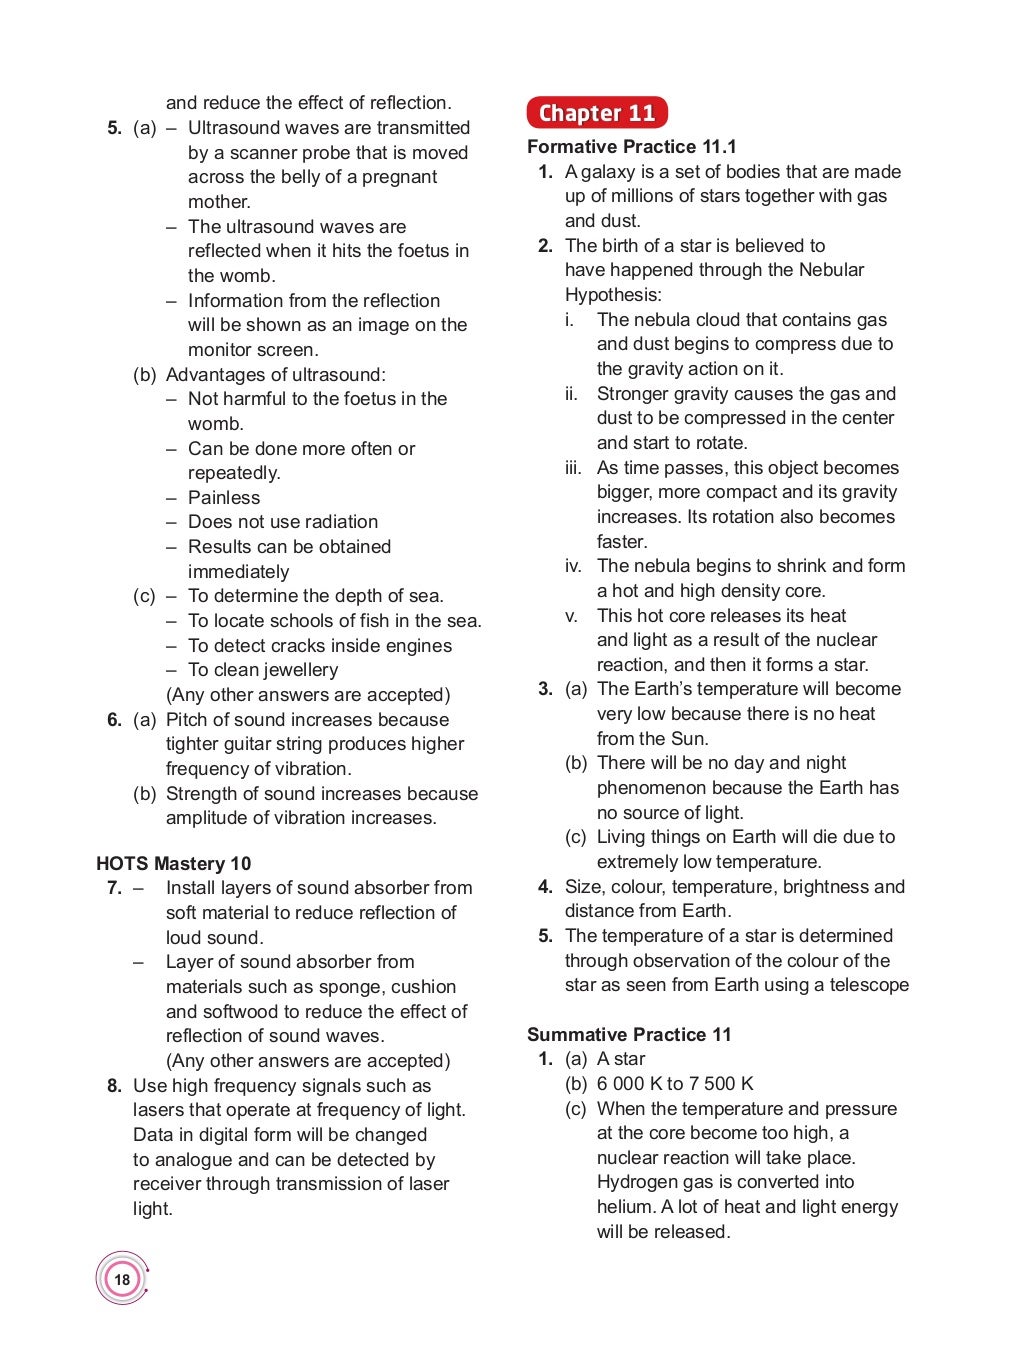 Full answers textbook science form 2 (3) (2)